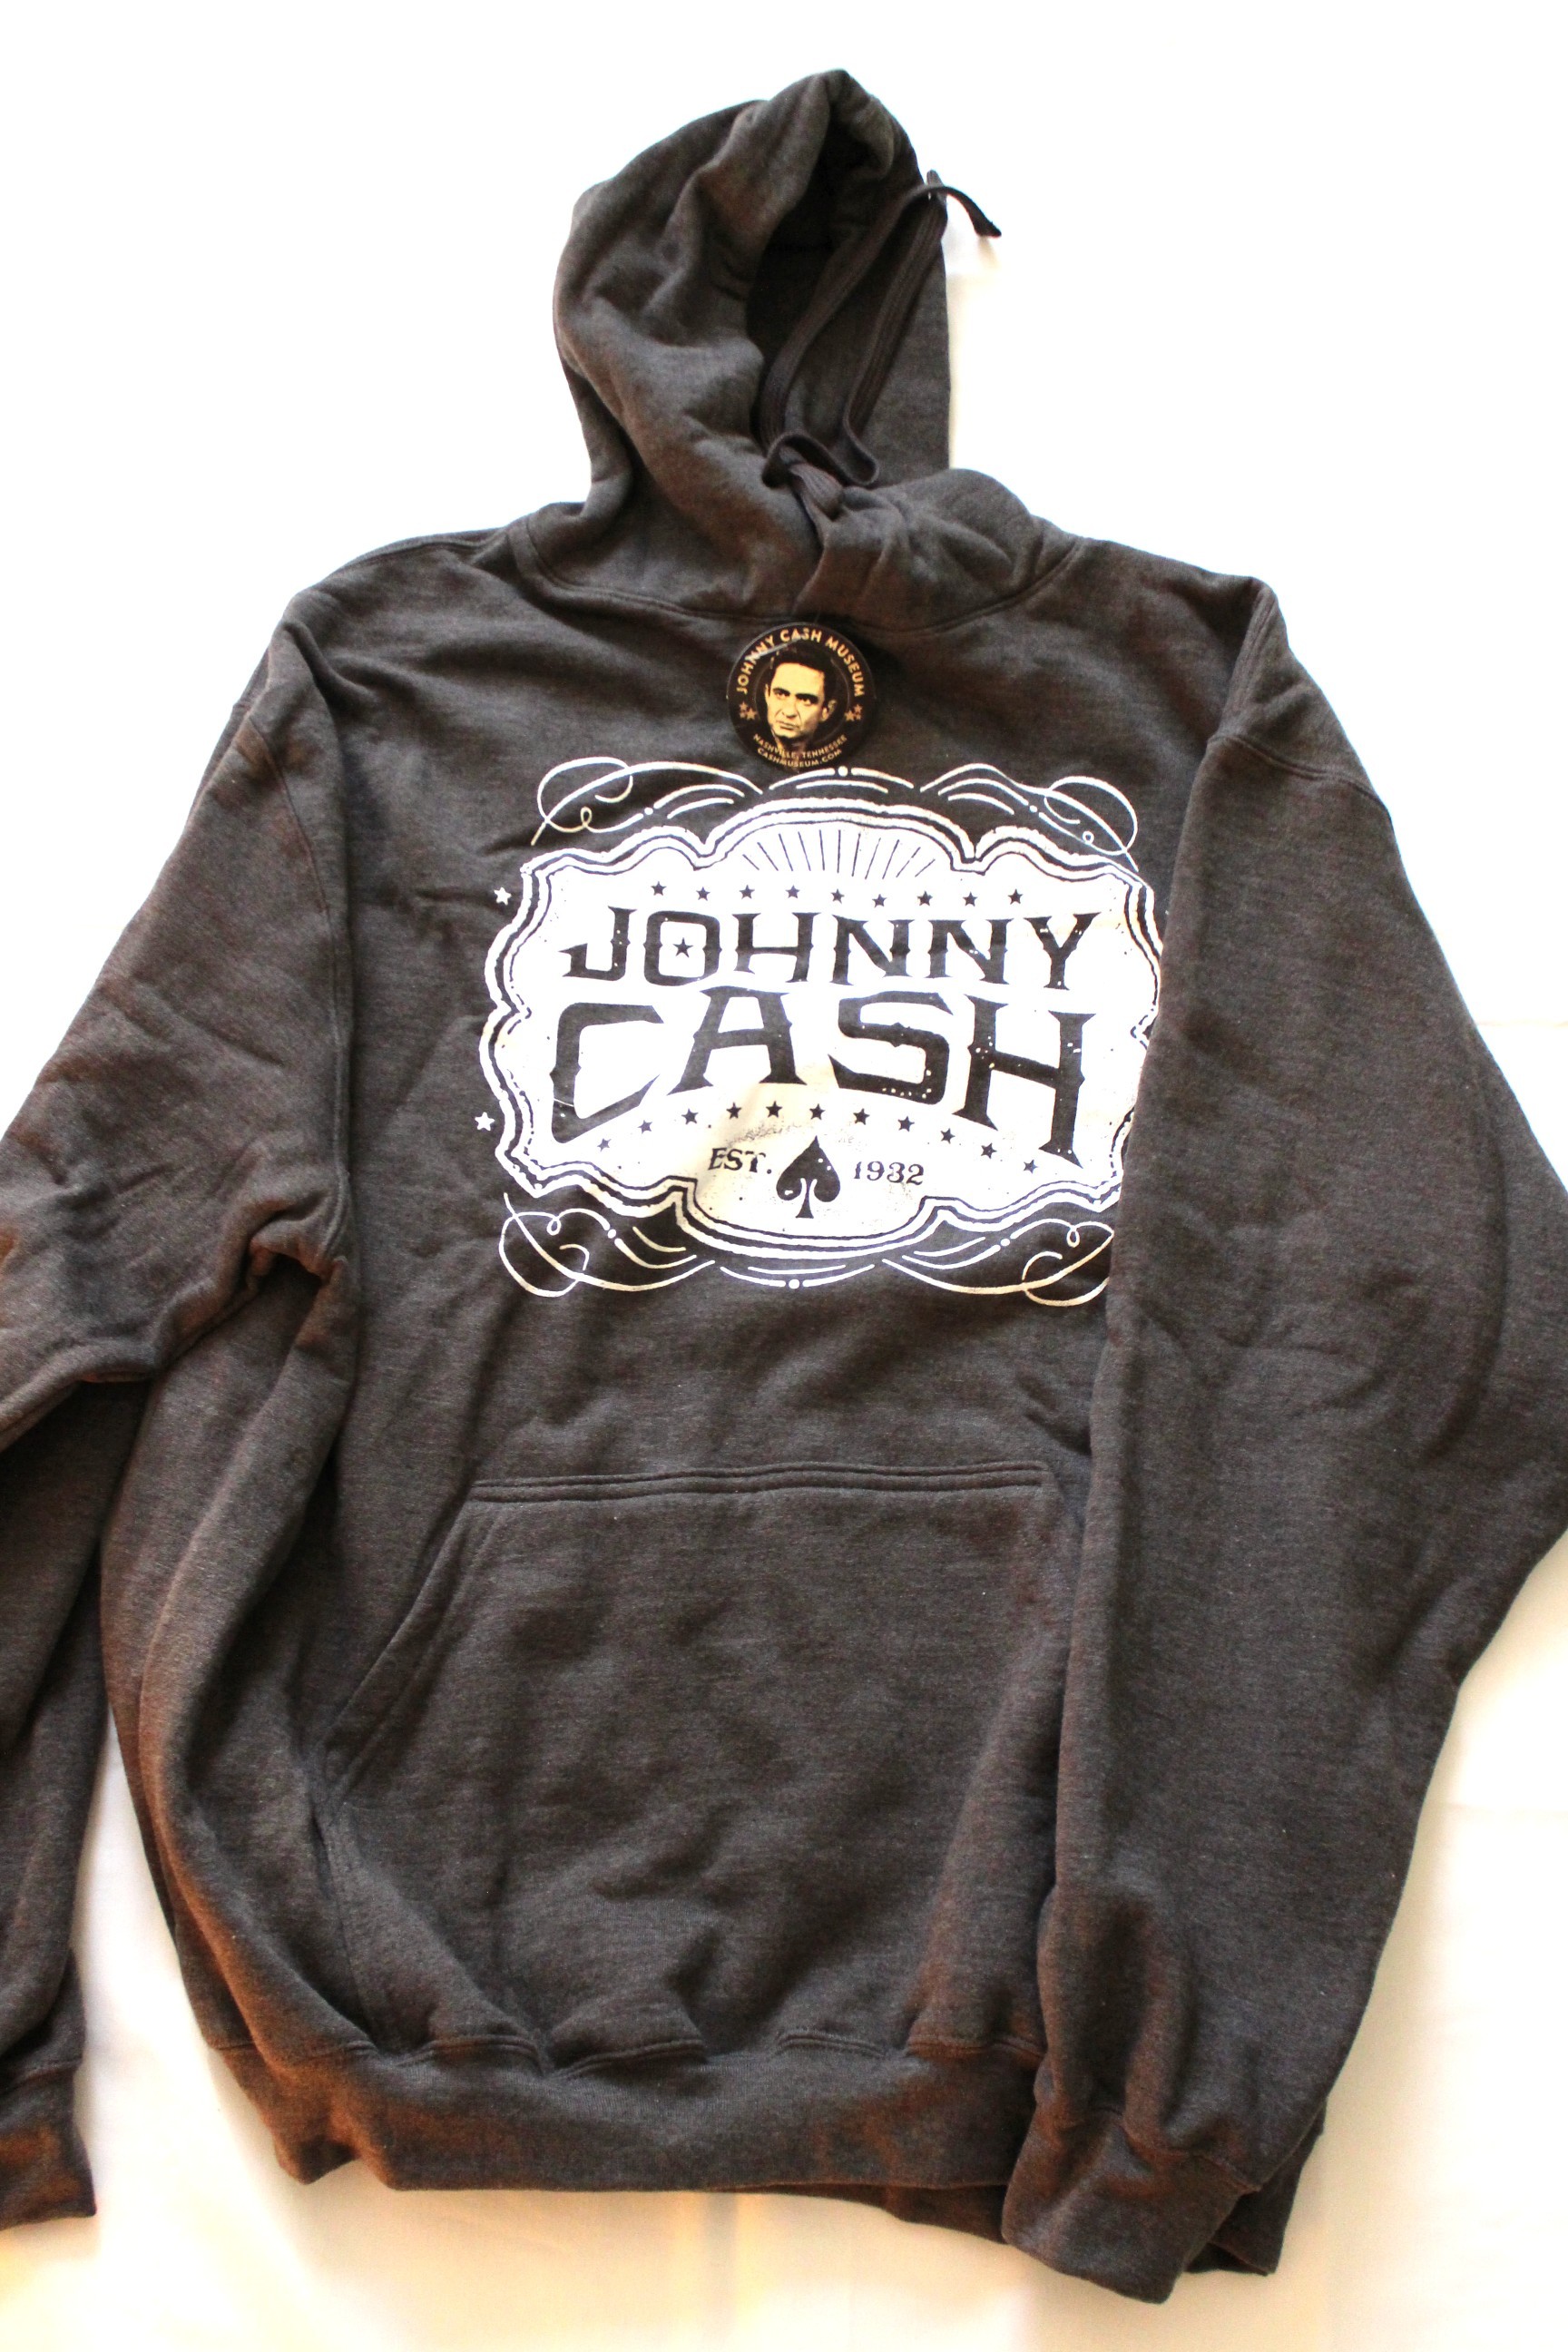 Johnny Cash - hoodie size Large